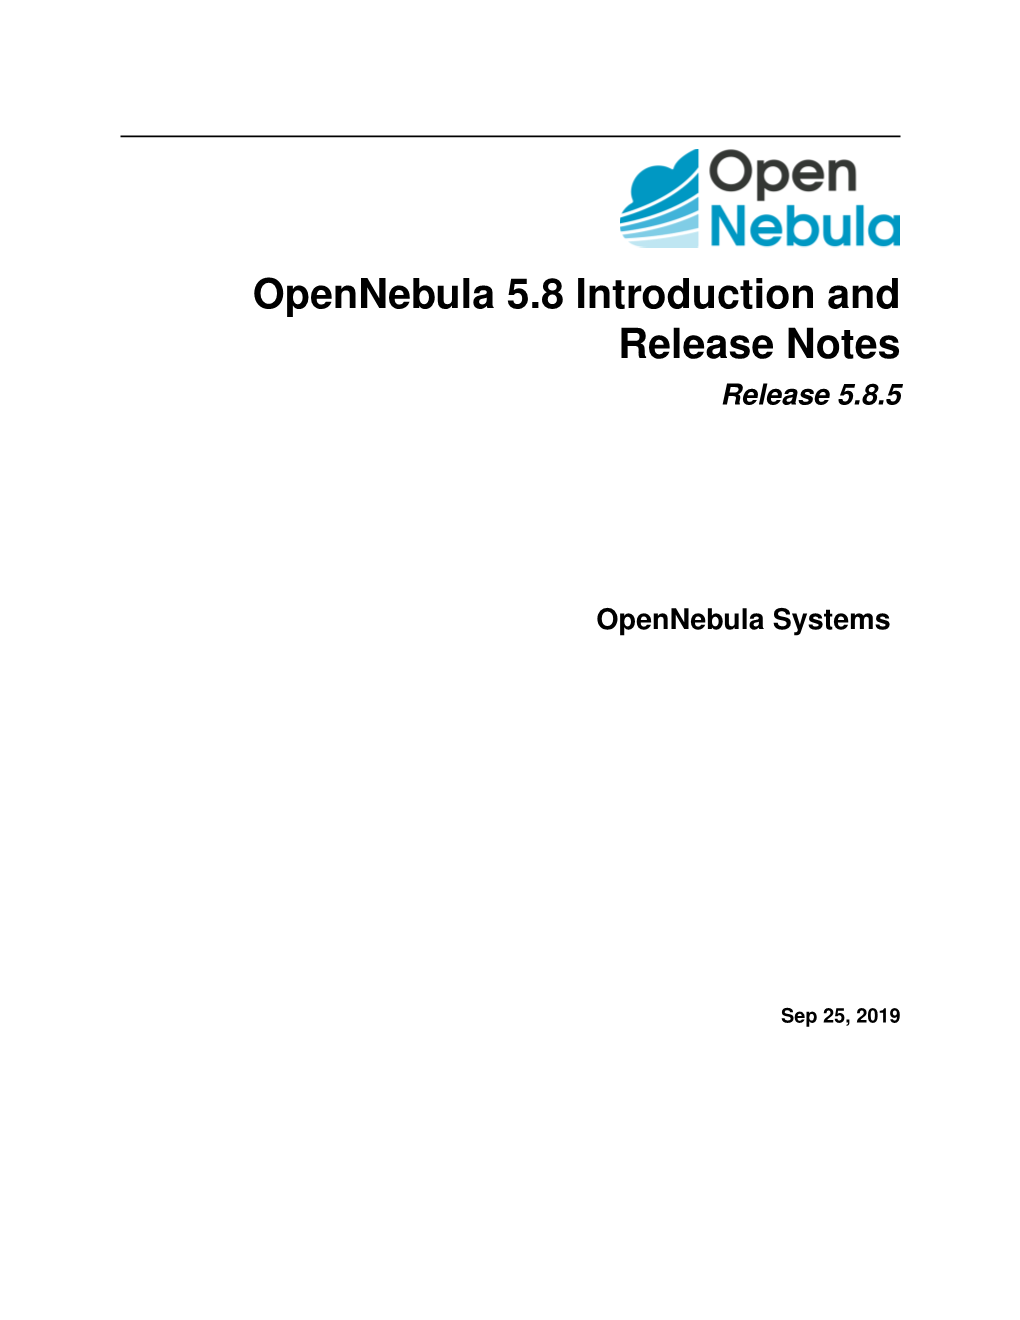 Opennebula 5.8 Introduction and Release Notes Release 5.8.5